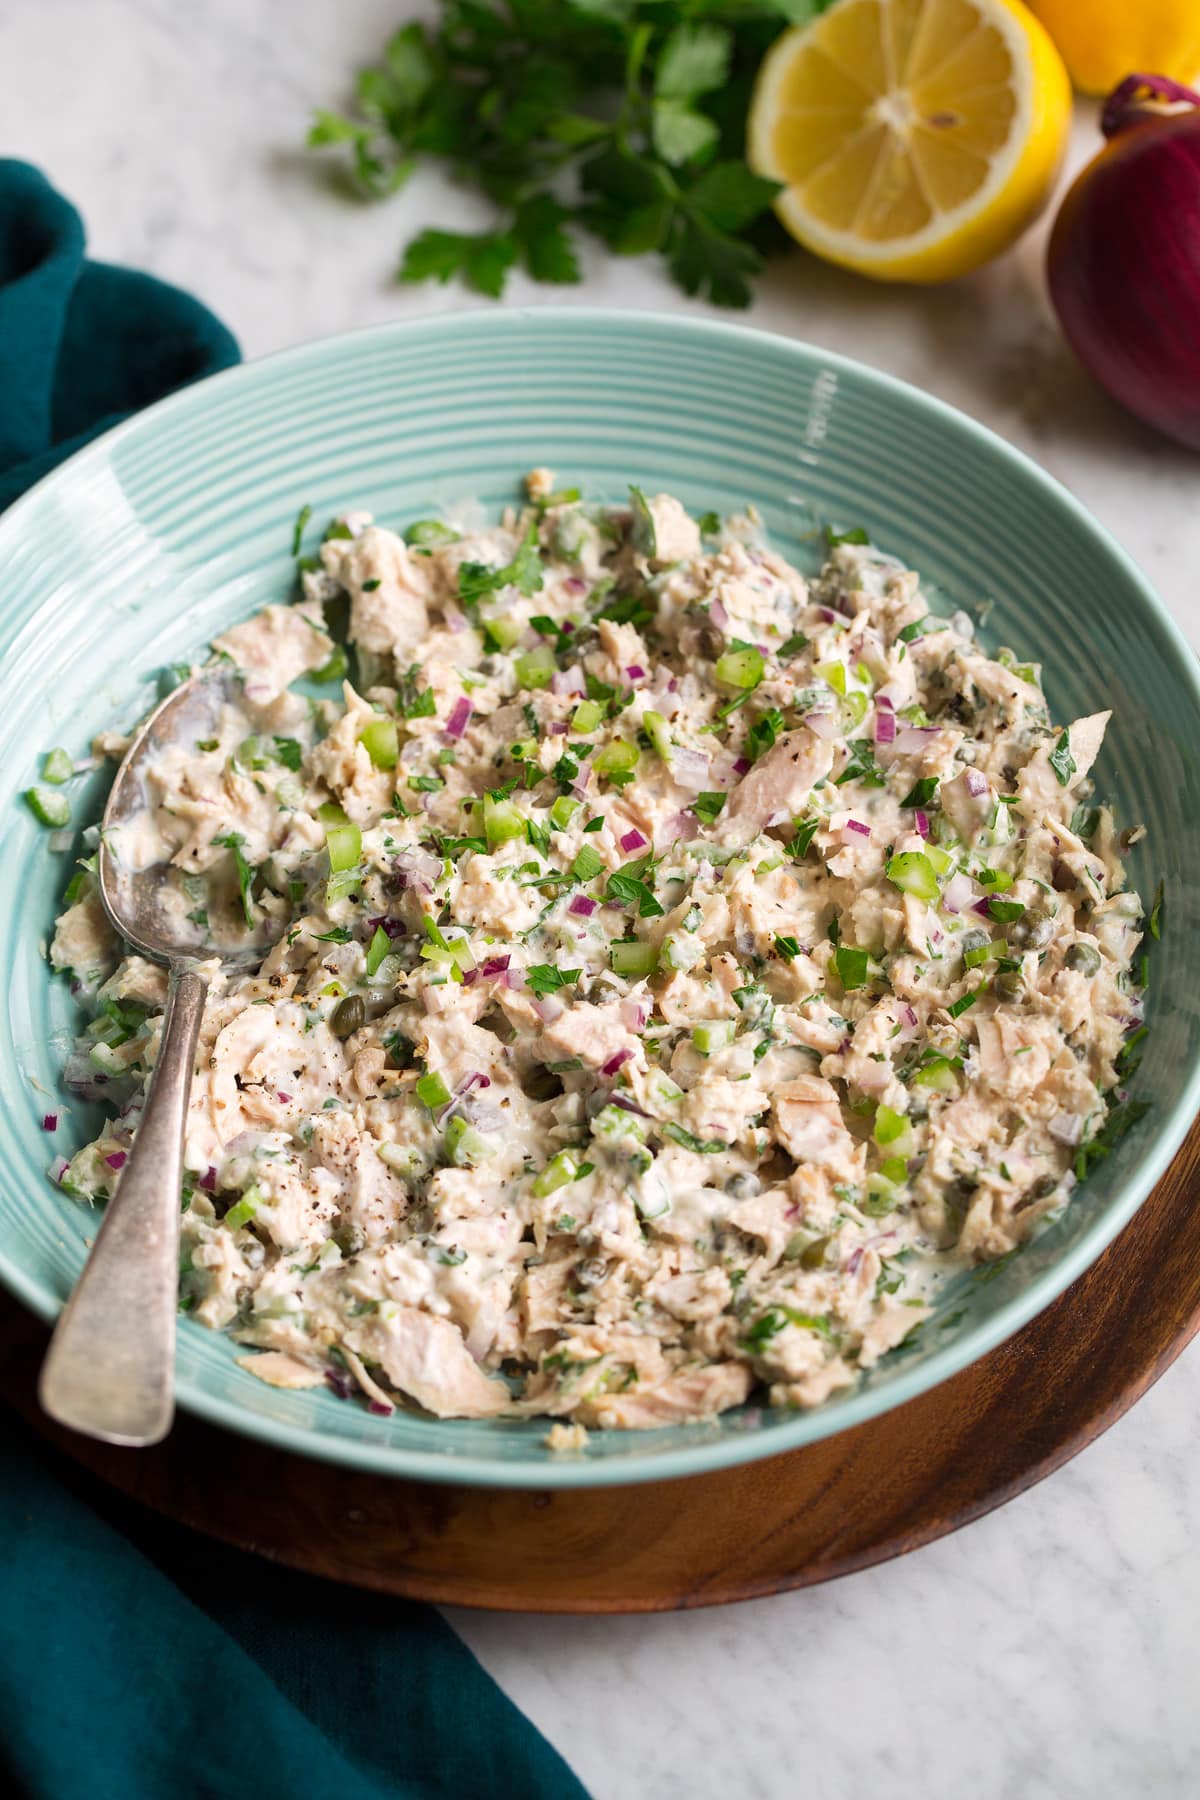 Tuna salad in a turquoise serving bowl.